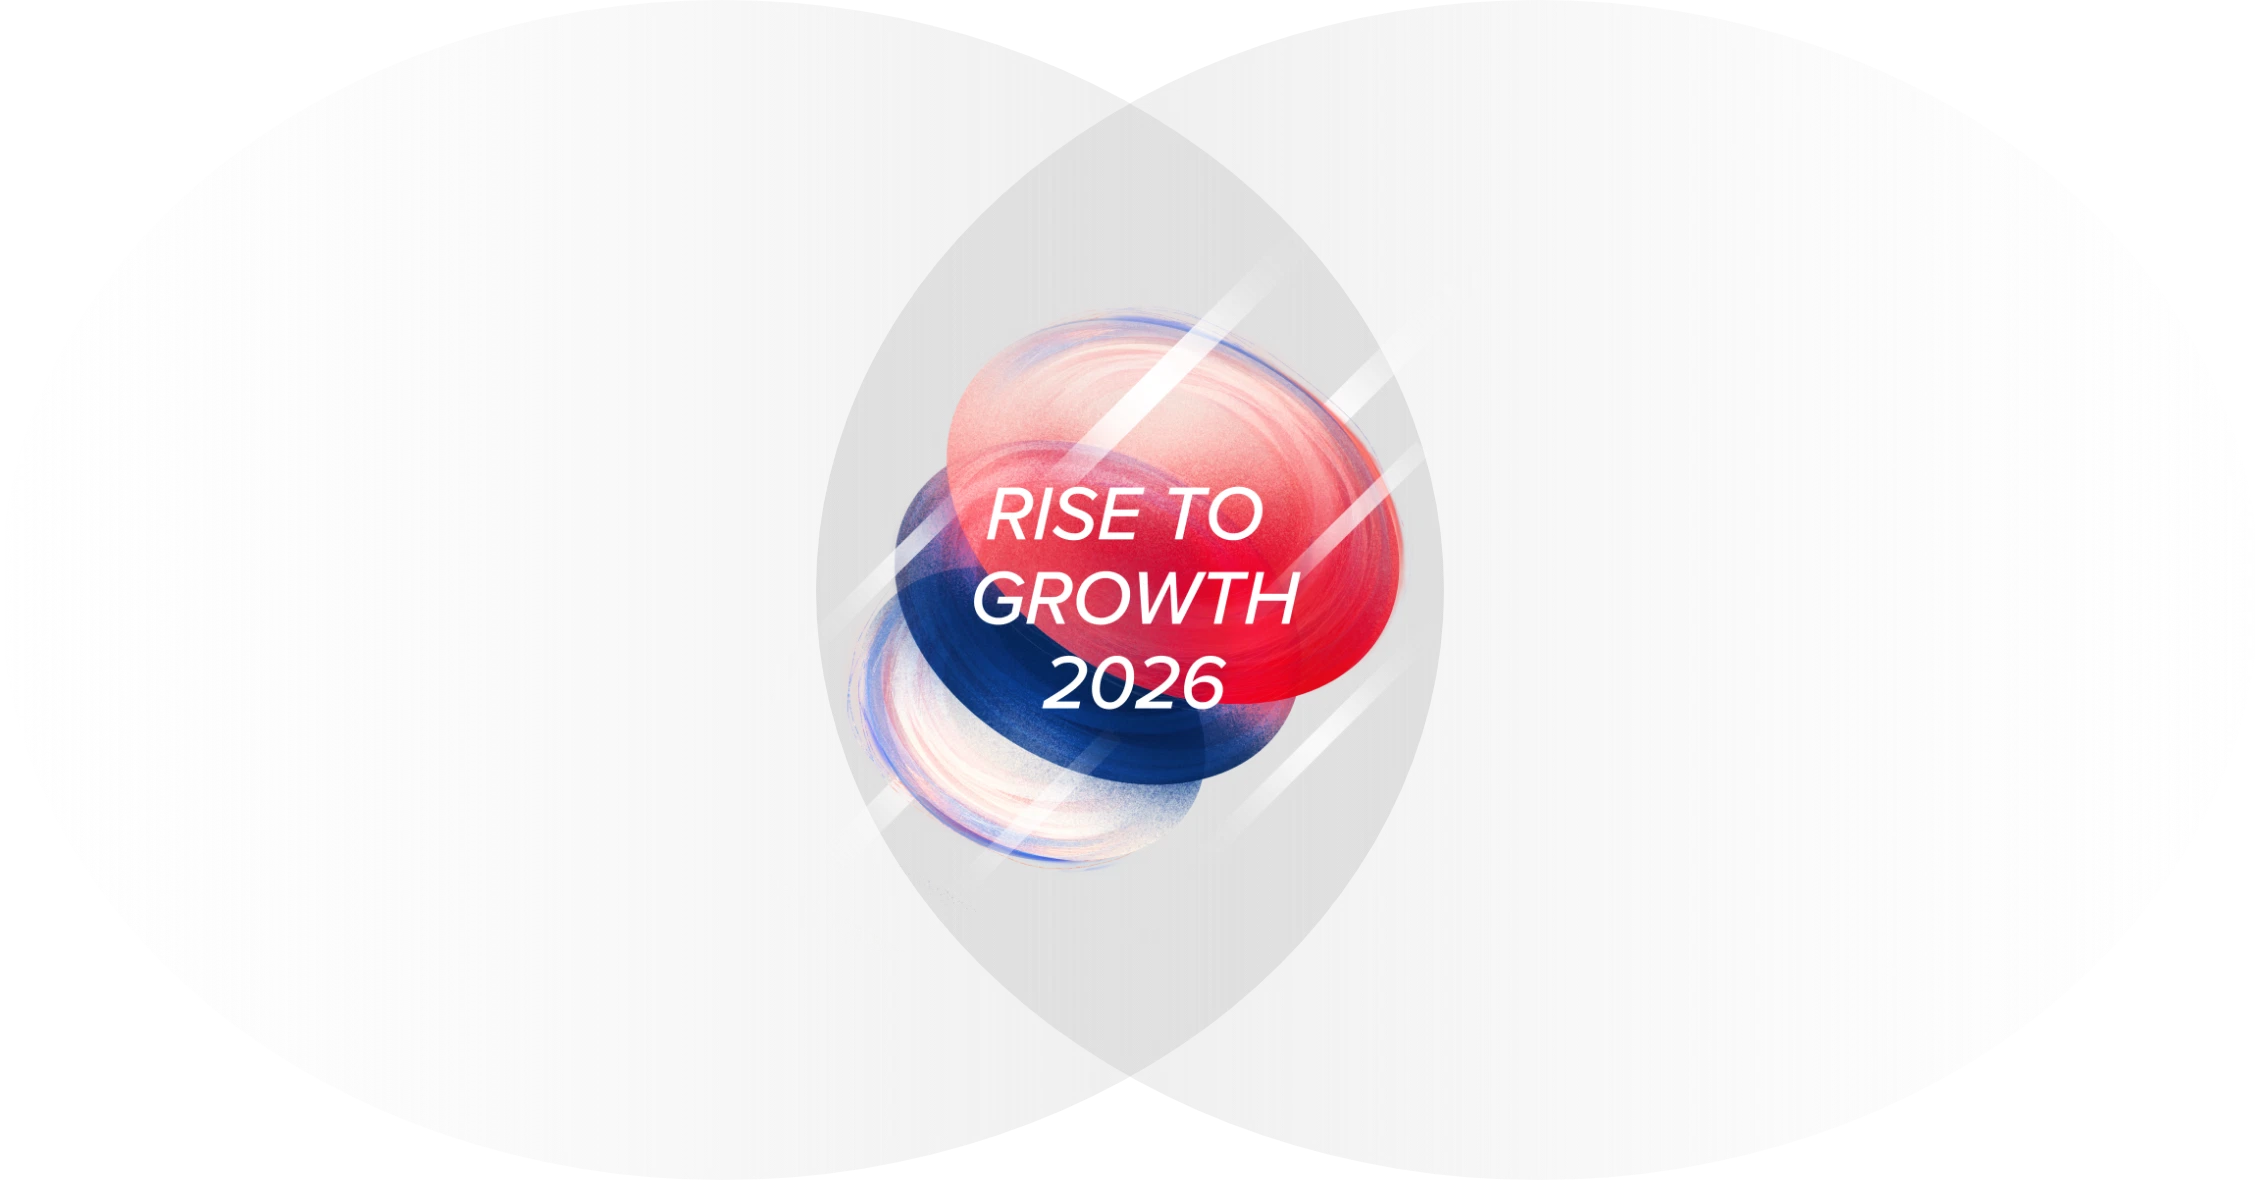 RISE TO GROUTH 2026